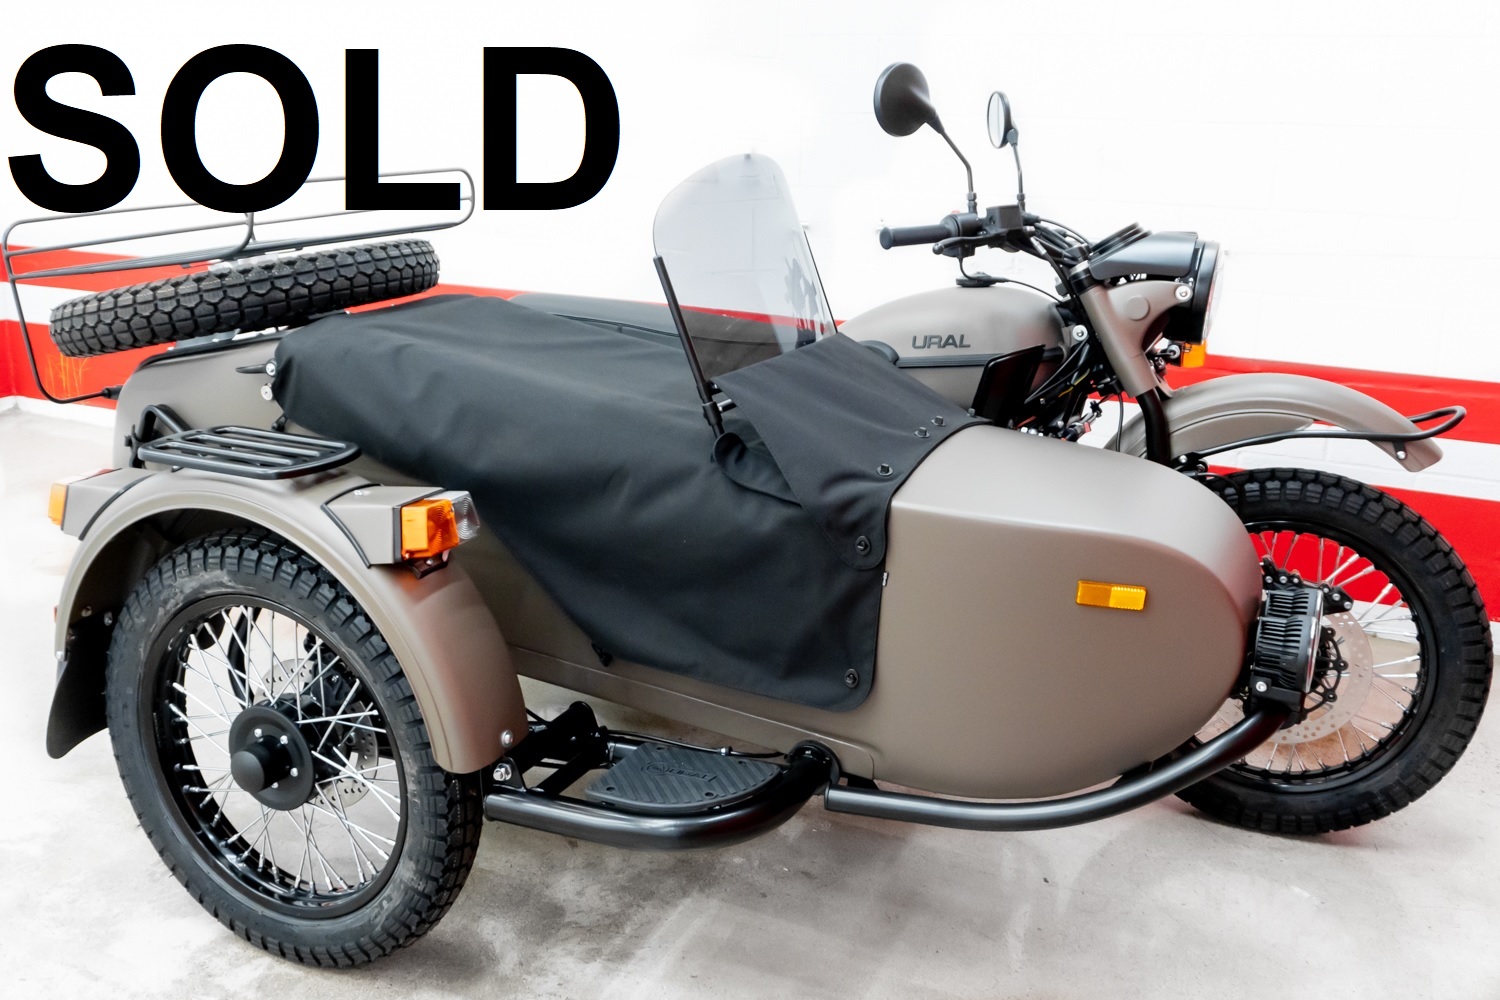 2021 Ural Gear Up (2WD) - NEW 2021 MODEL - ADVENTURE EDITION